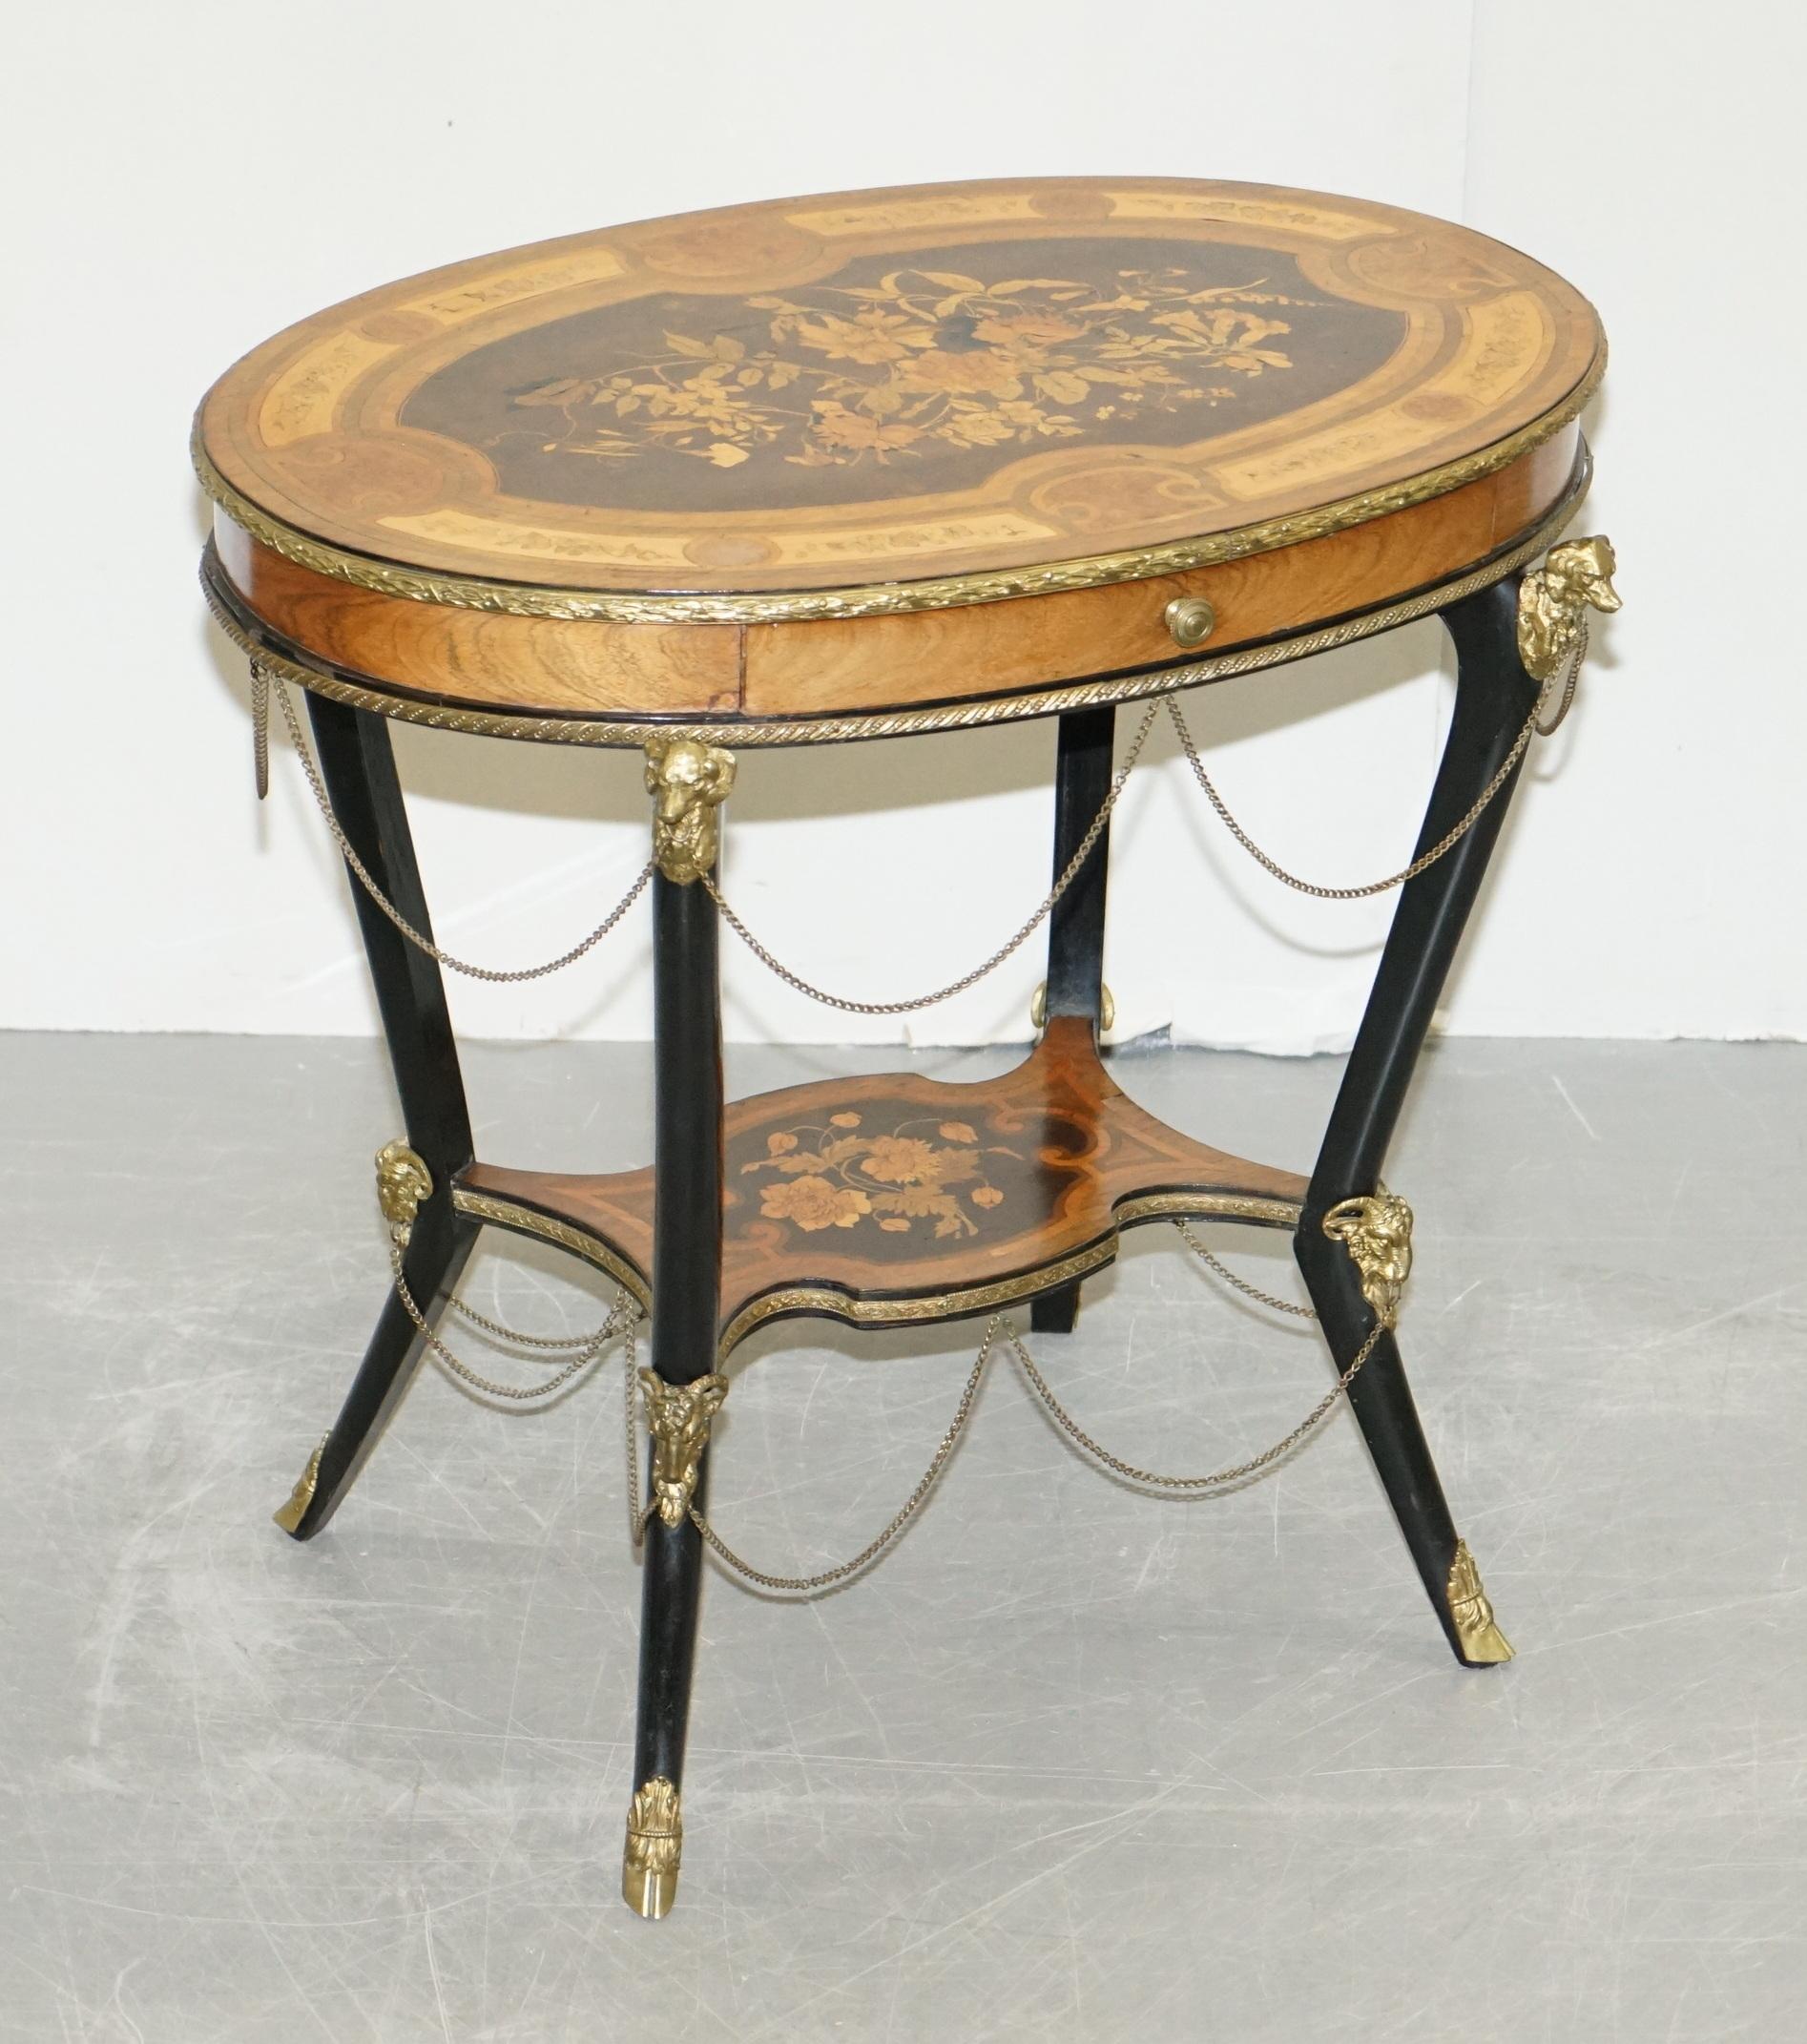 We are delighted to offer for sale this lovely, highly decorative antique 19th century tulipwood, burr walnut ebonised and marquetry inlaid centre table with gold gilt bronze rams heads, feet and dogs bust decorations after Auguste Maximilien